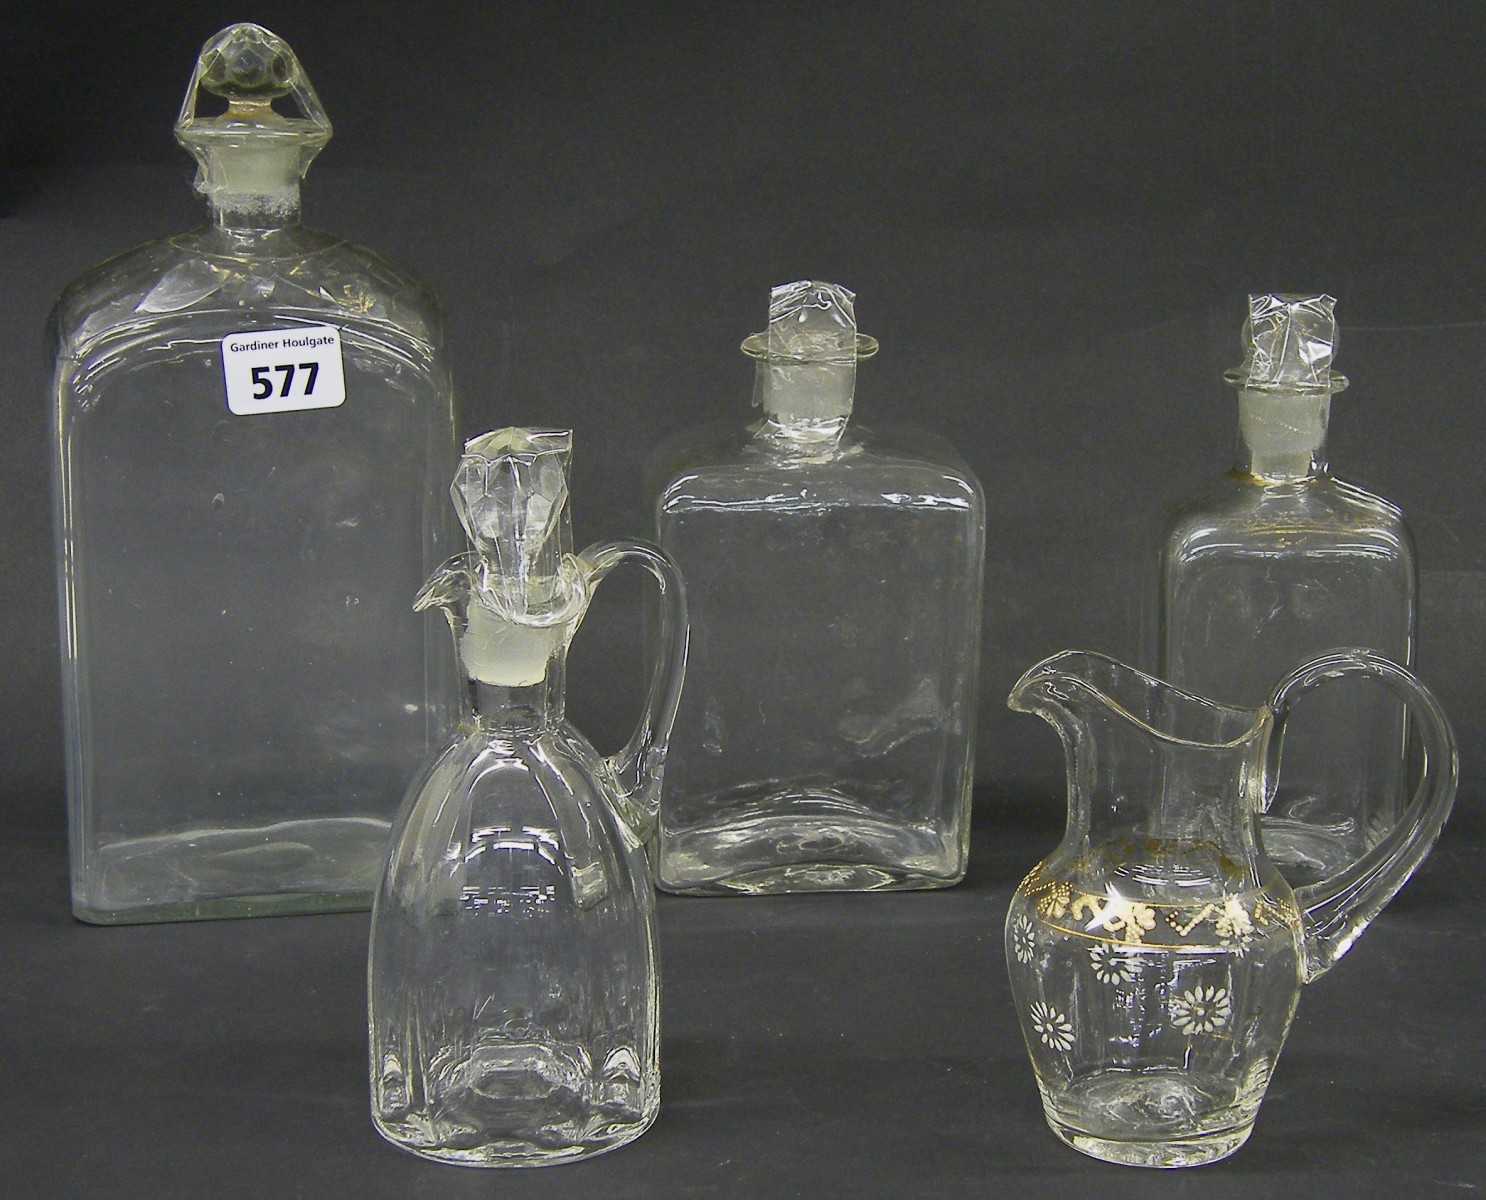 Three antique square glass decanters, with faded gilded overlay; together with a further glass jug